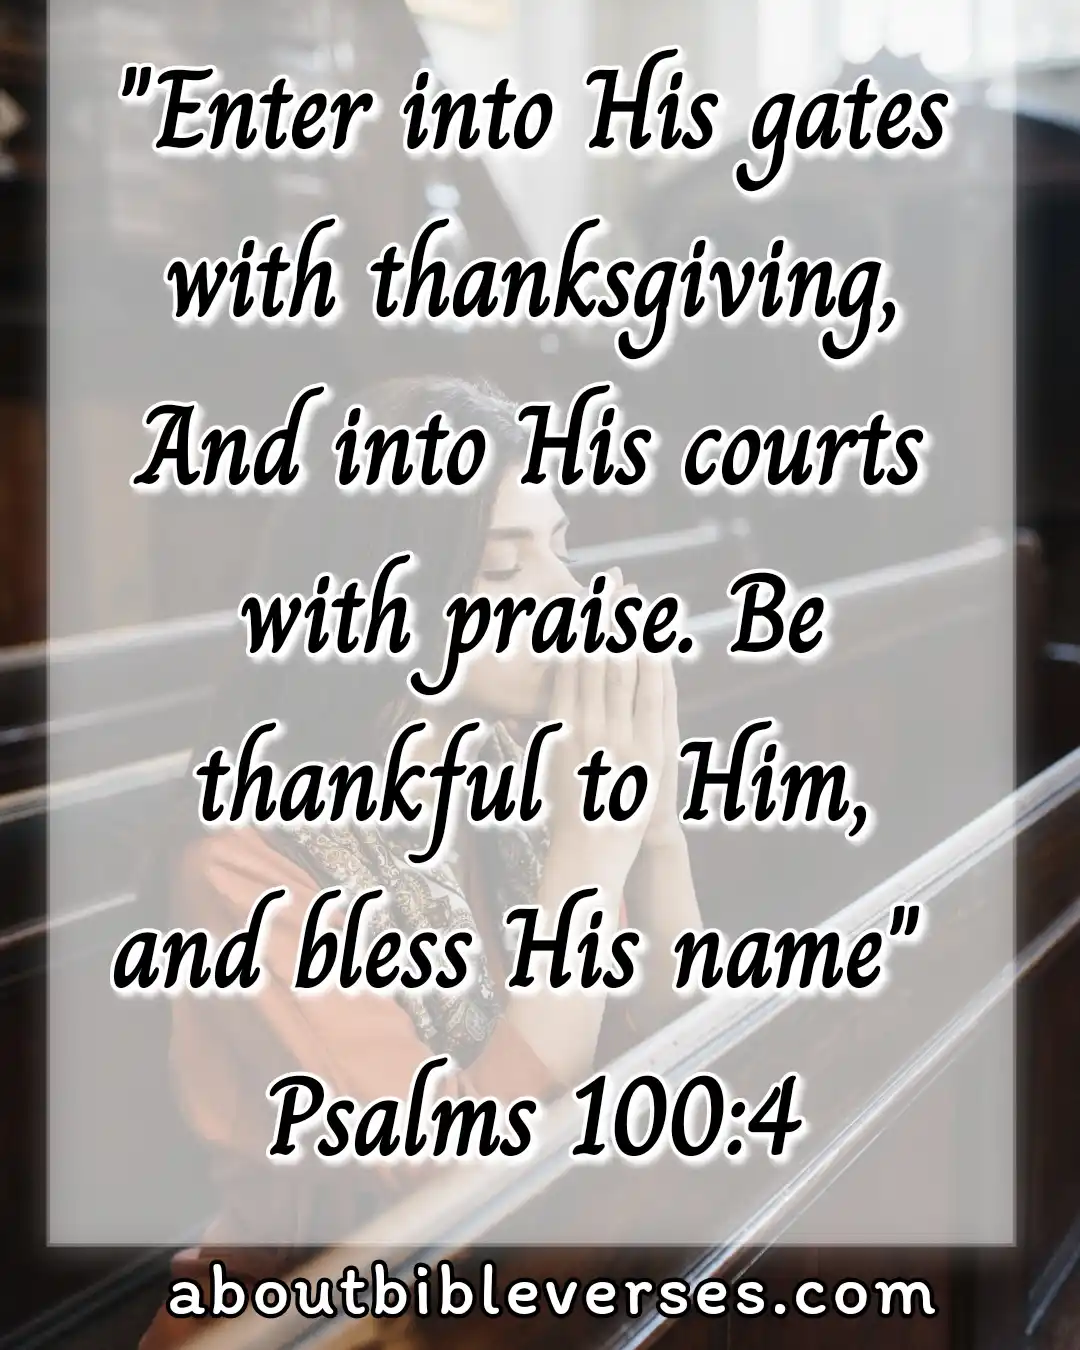 Bible Verses About Being Thankful For the Little Things (Psalm 100:4)